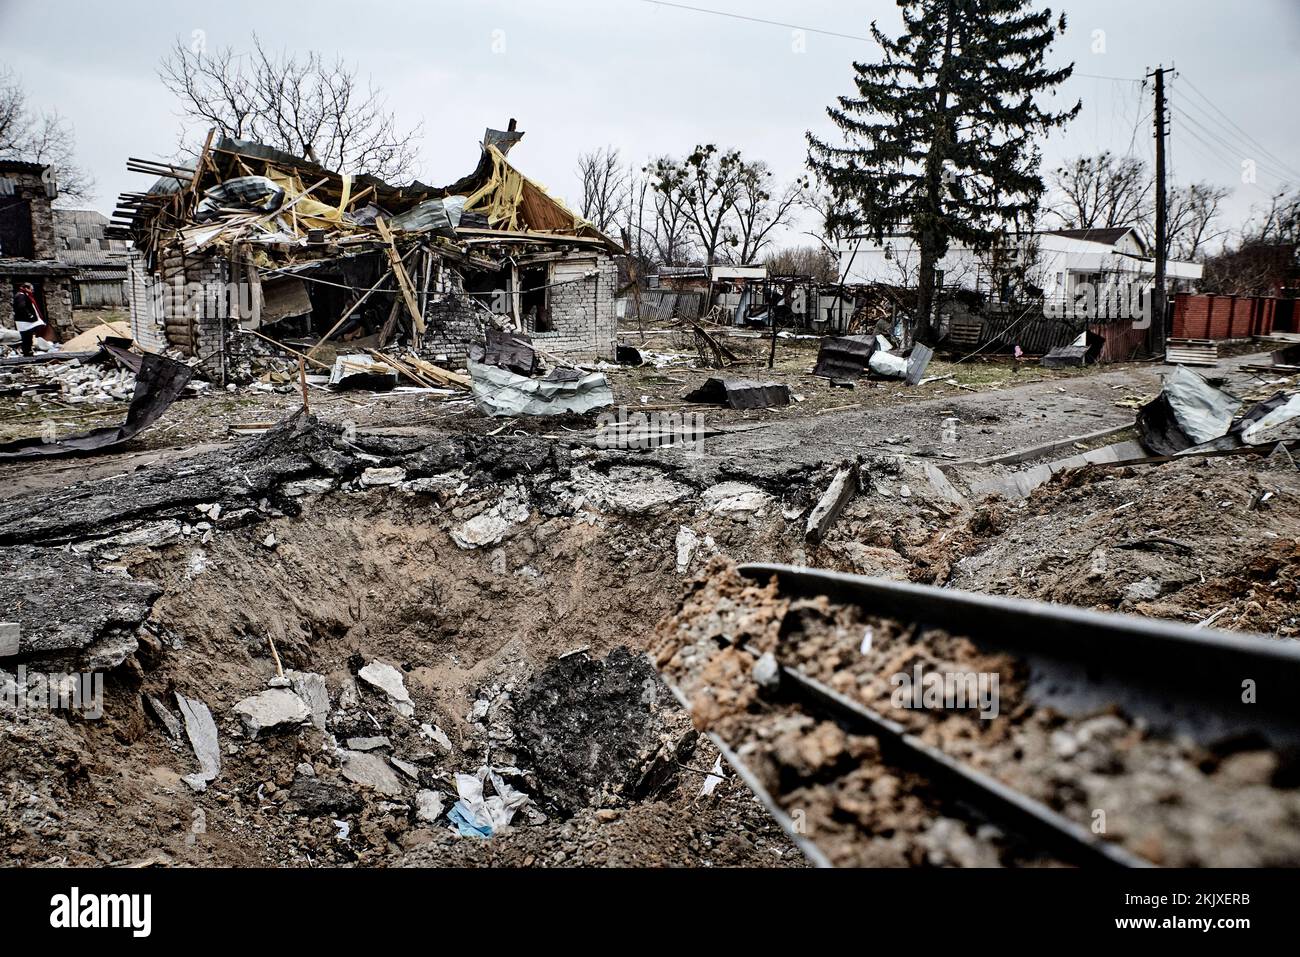 Antonin Burat / Le Pictorium -  War in Ukraine: David stands up to Goliath -  26/3/2022  -  Ukraine / OBLAST OF KYIV  -  Remains of a house that was r Stock Photo